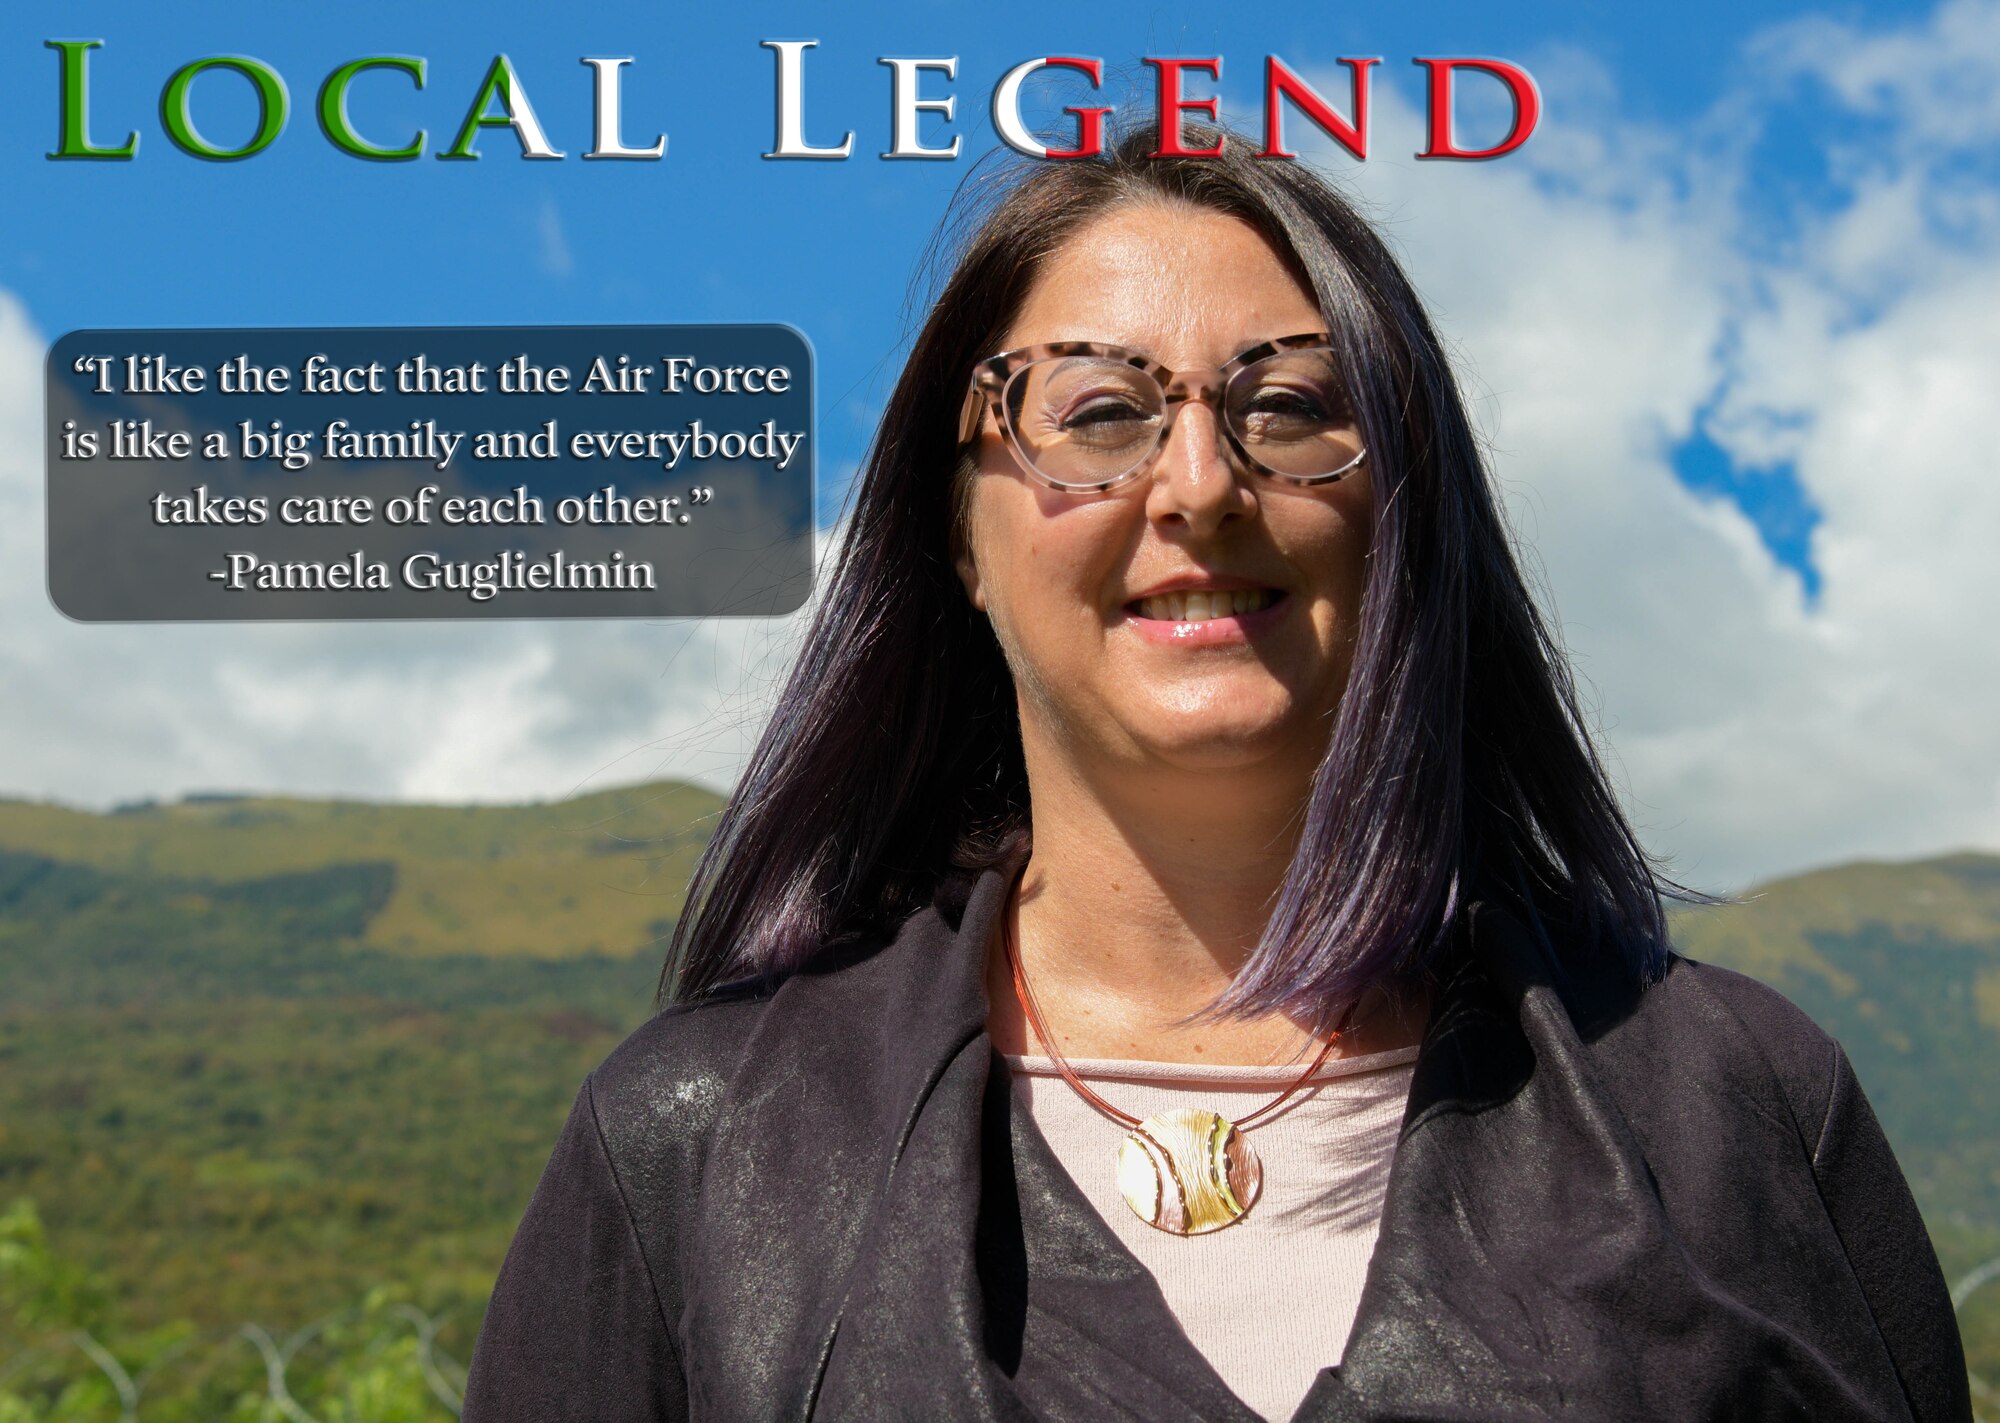 This month’s Local Legend nomination is Pamela Guglielmin, 31st Force Support Squadron base formal training manager, and an Aviano native. She manages the training for all military and civilian members assigned to Aviano Air Base.